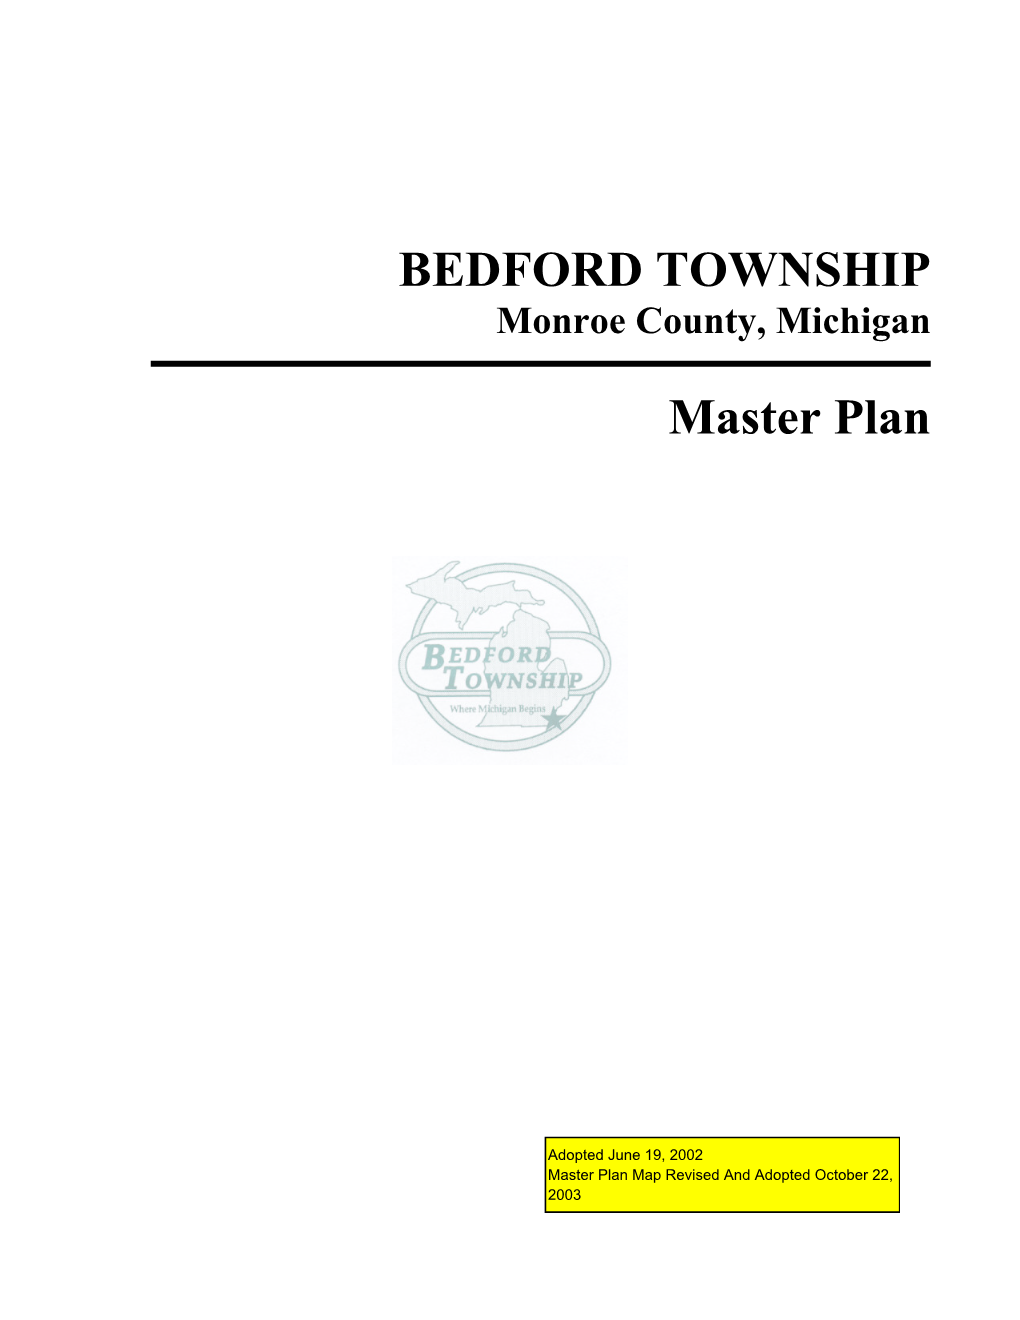 Master Plan BEDFORD TOWNSHIP PLANNING COMMISSION